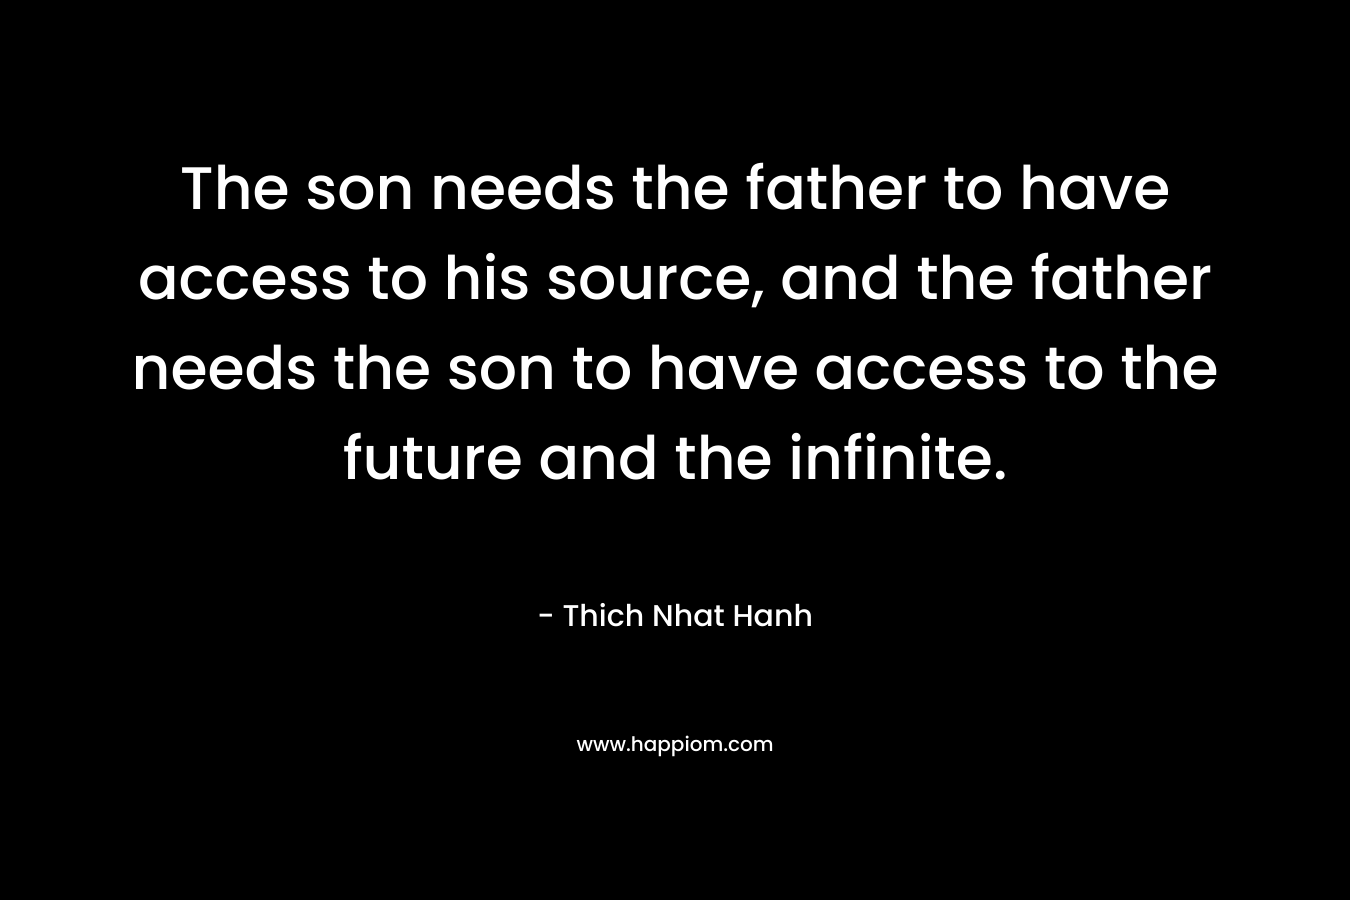 The son needs the father to have access to his source, and the father needs the son to have access to the future and the infinite. – Thich Nhat Hanh